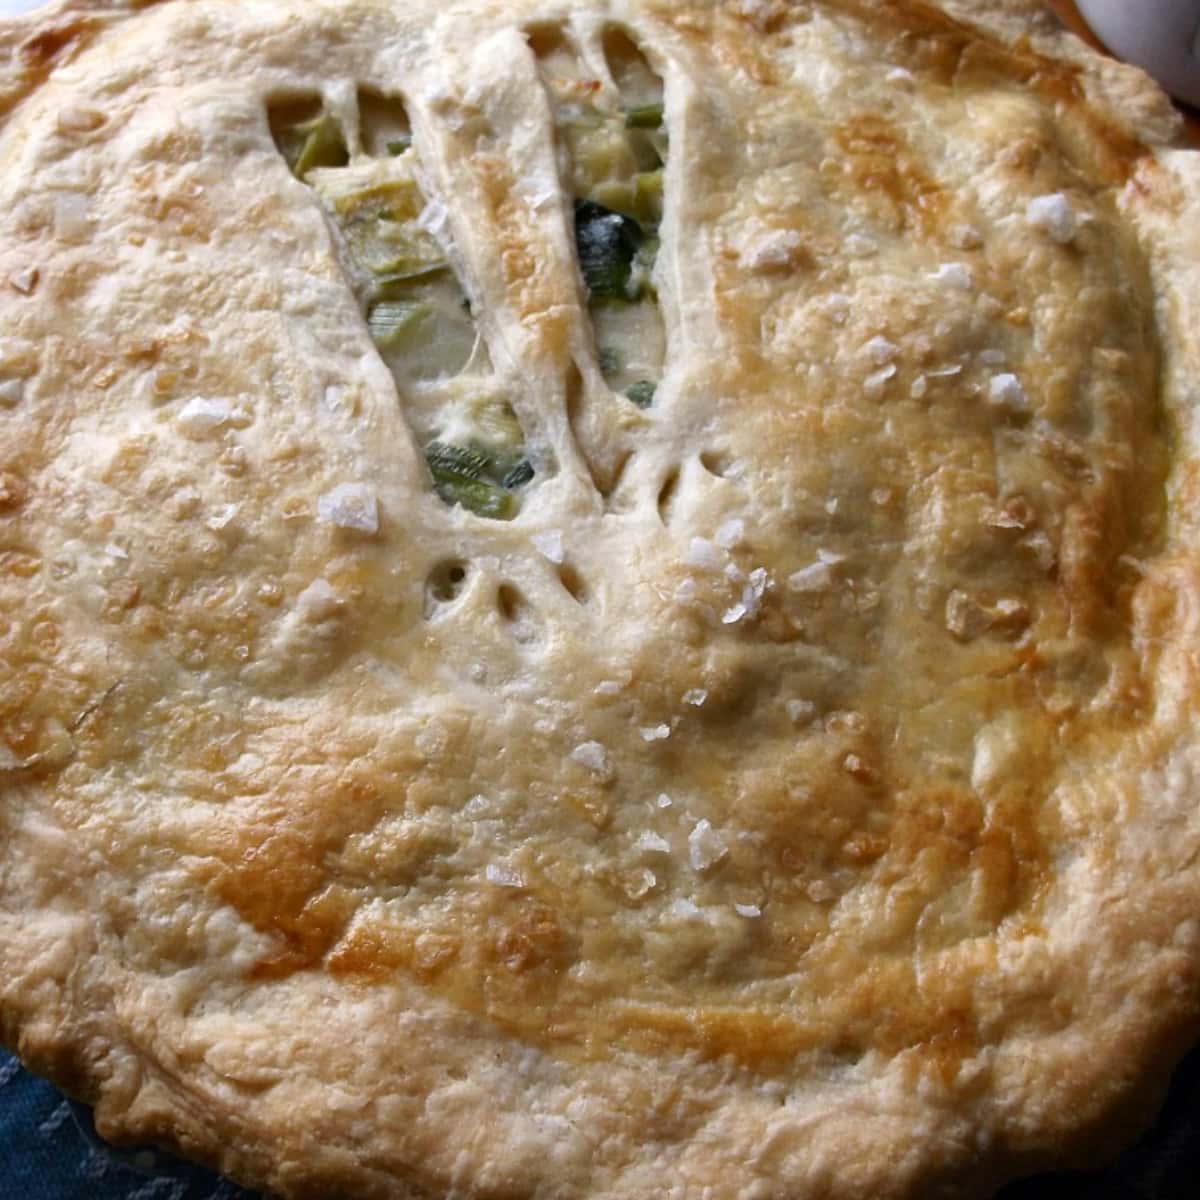 Whole pie with browned crust and leek-shaped cutouts in top